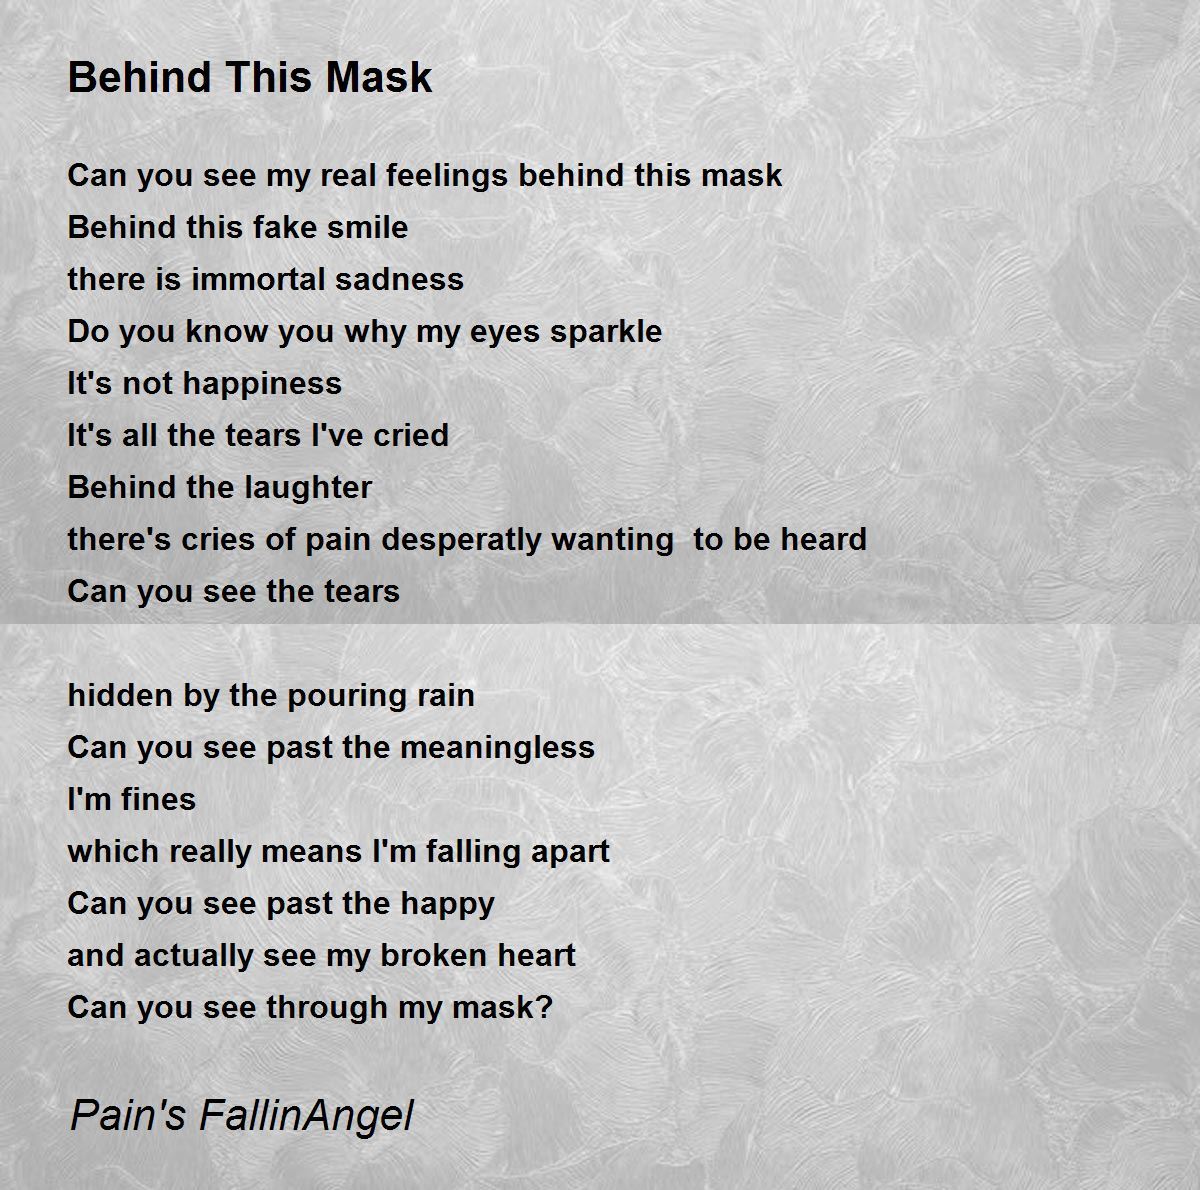 Behind This Mask - Behind This Mask Poem by Darkbeauty's ...